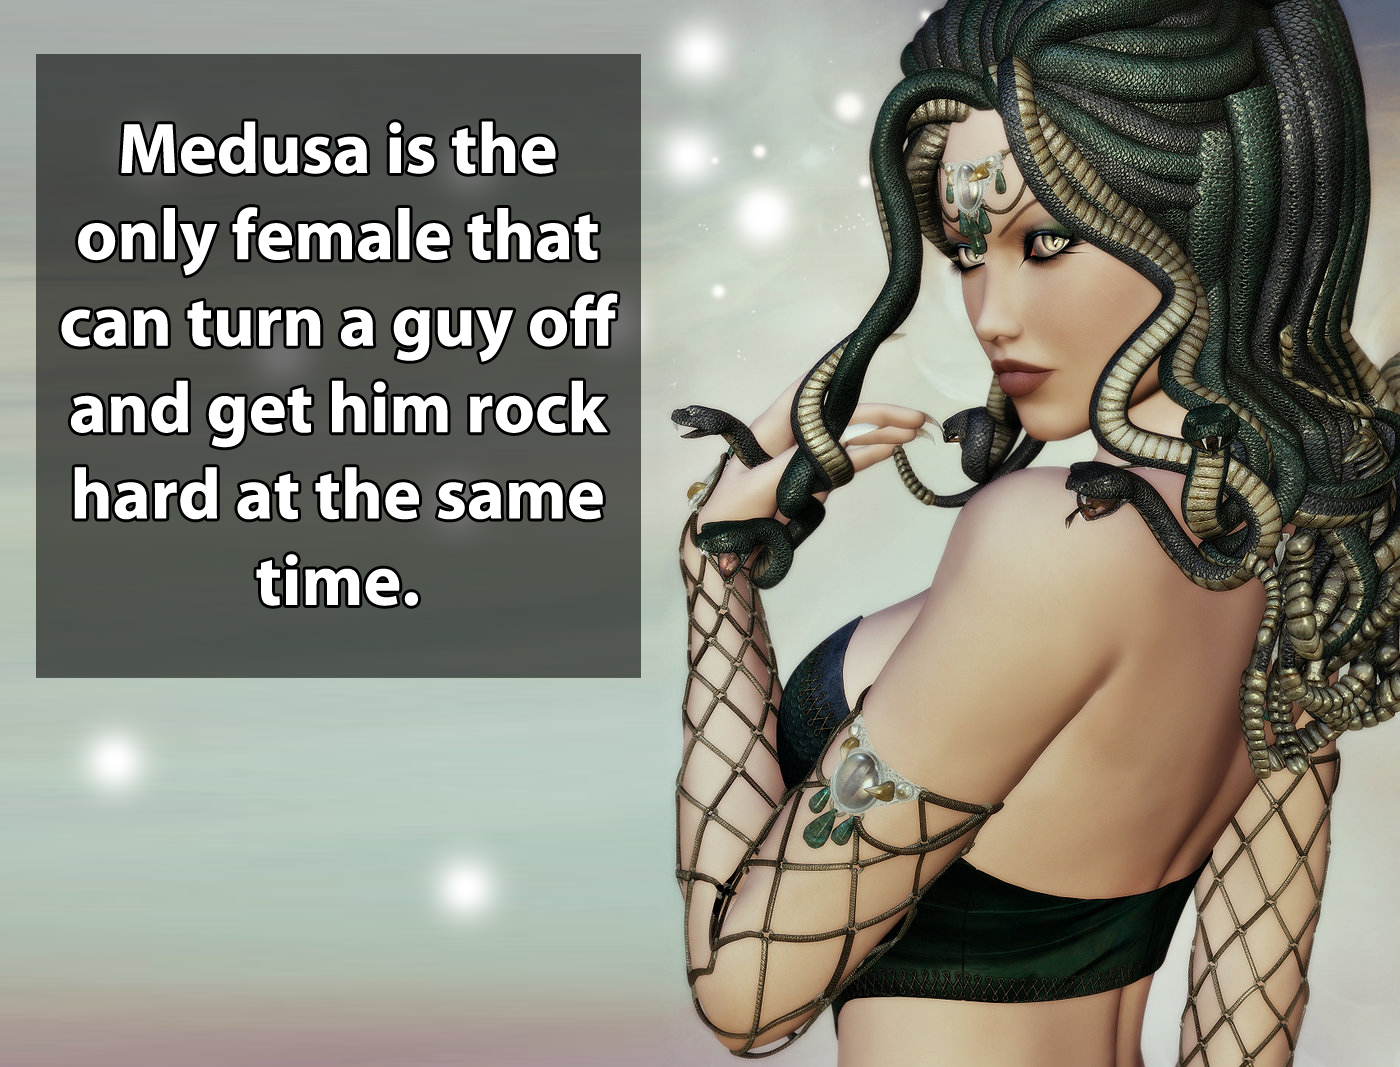 black hair - Medusa is the only female that can turn a guy off and get him rock hard at the same time.